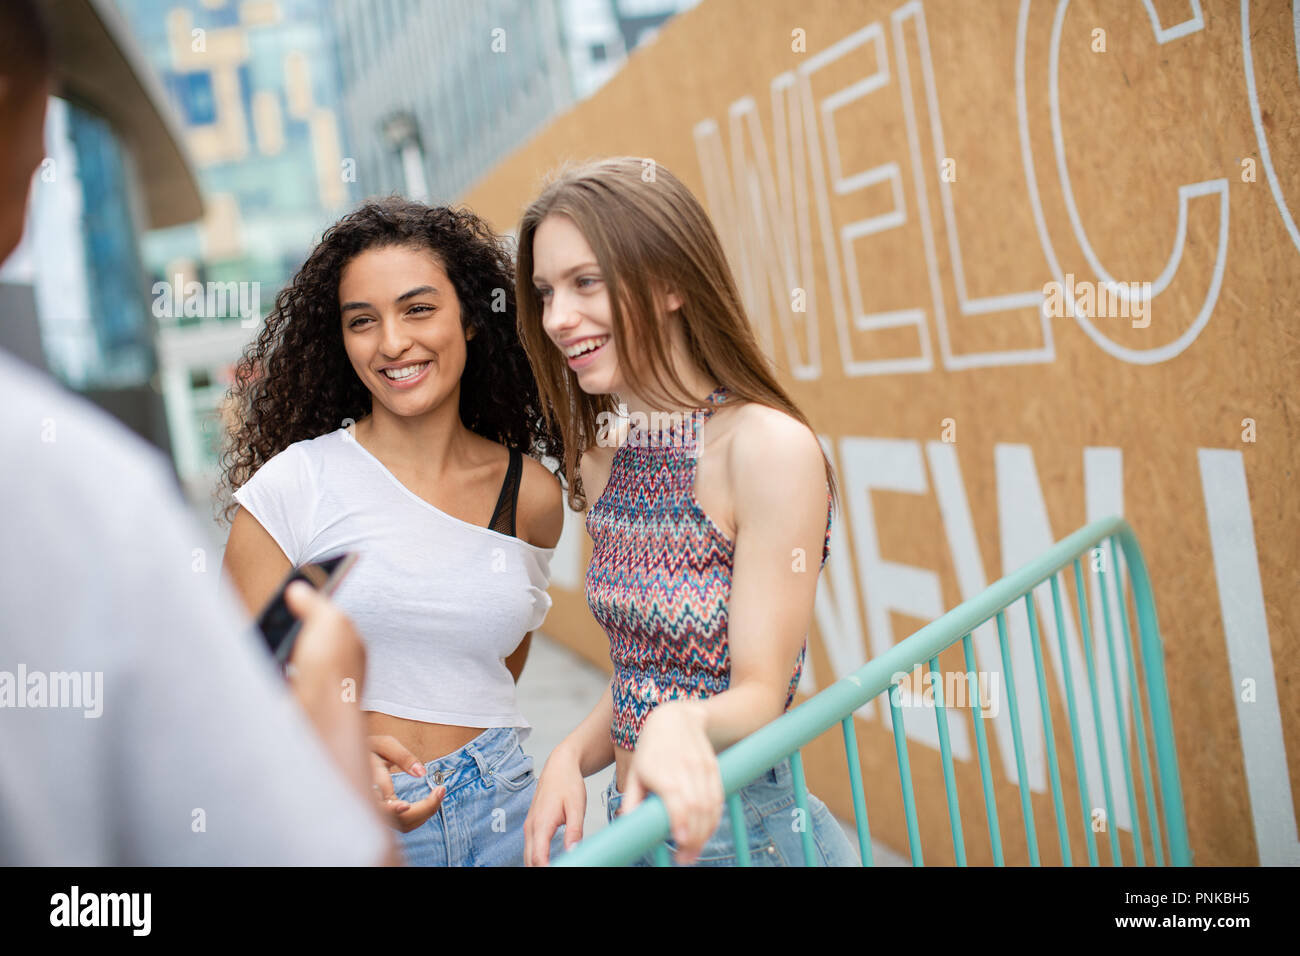 Teenagers socialising outdoors in city with smartphone Stock Photo